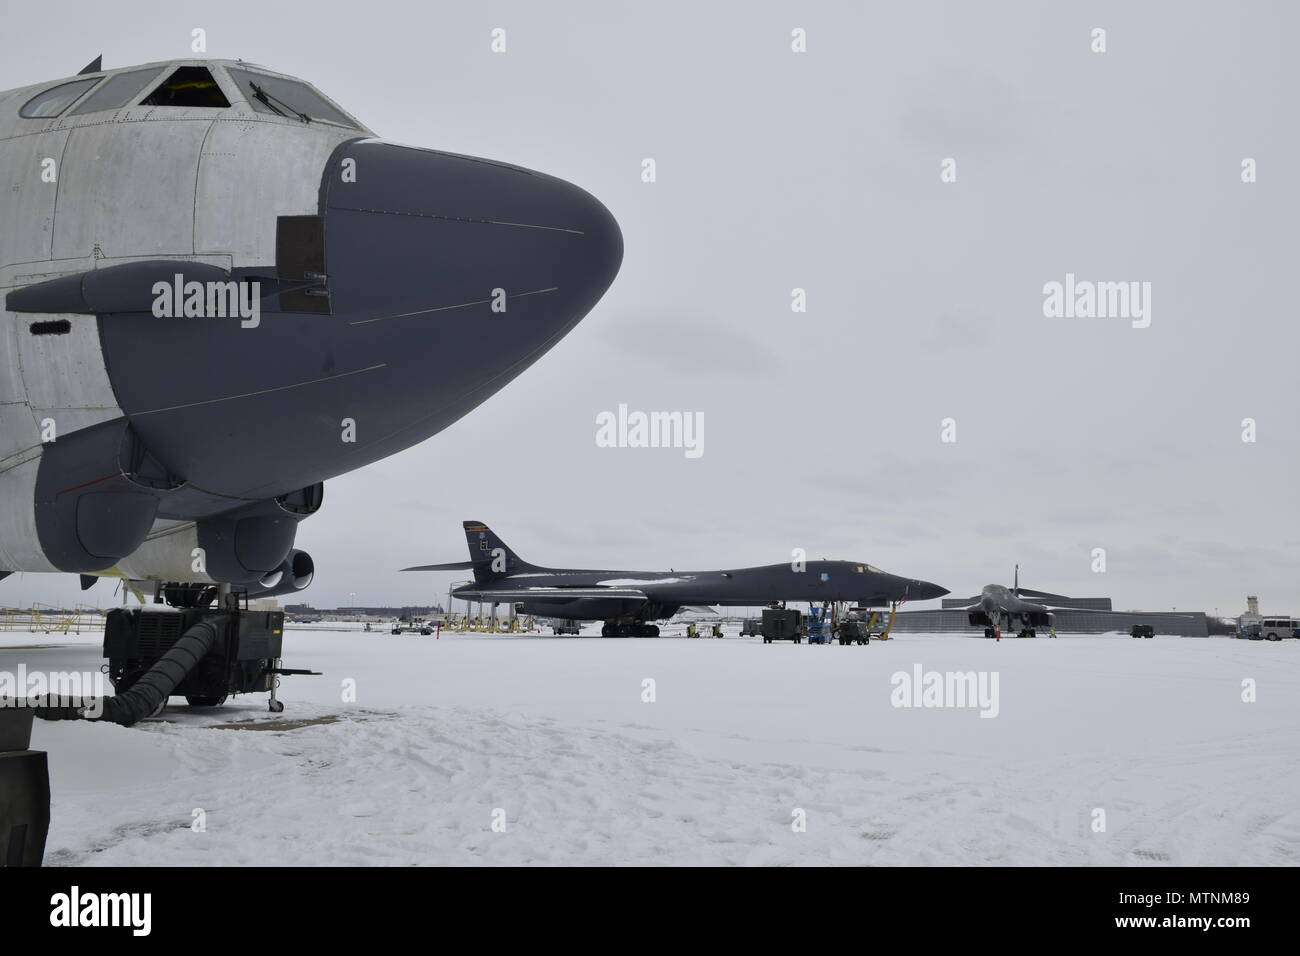 The nose of a B-52H Stratofortress in natural metal with gunship grey components frames a B-1B Lancer in the background on a snowy flight line at the Oklahoma City Air Logistics Complex Jan. 6, 2017, Tinker Air Force Base, Oklahoma. Despite the rare accumulation of snow, the important maintenance and sustainment operations conducted by the OC-ALC continue to ensure aircraft production stays on track to deliver capability to the warfighter. (U.S. Air Force photo/Greg L. Davis) Stock Photo